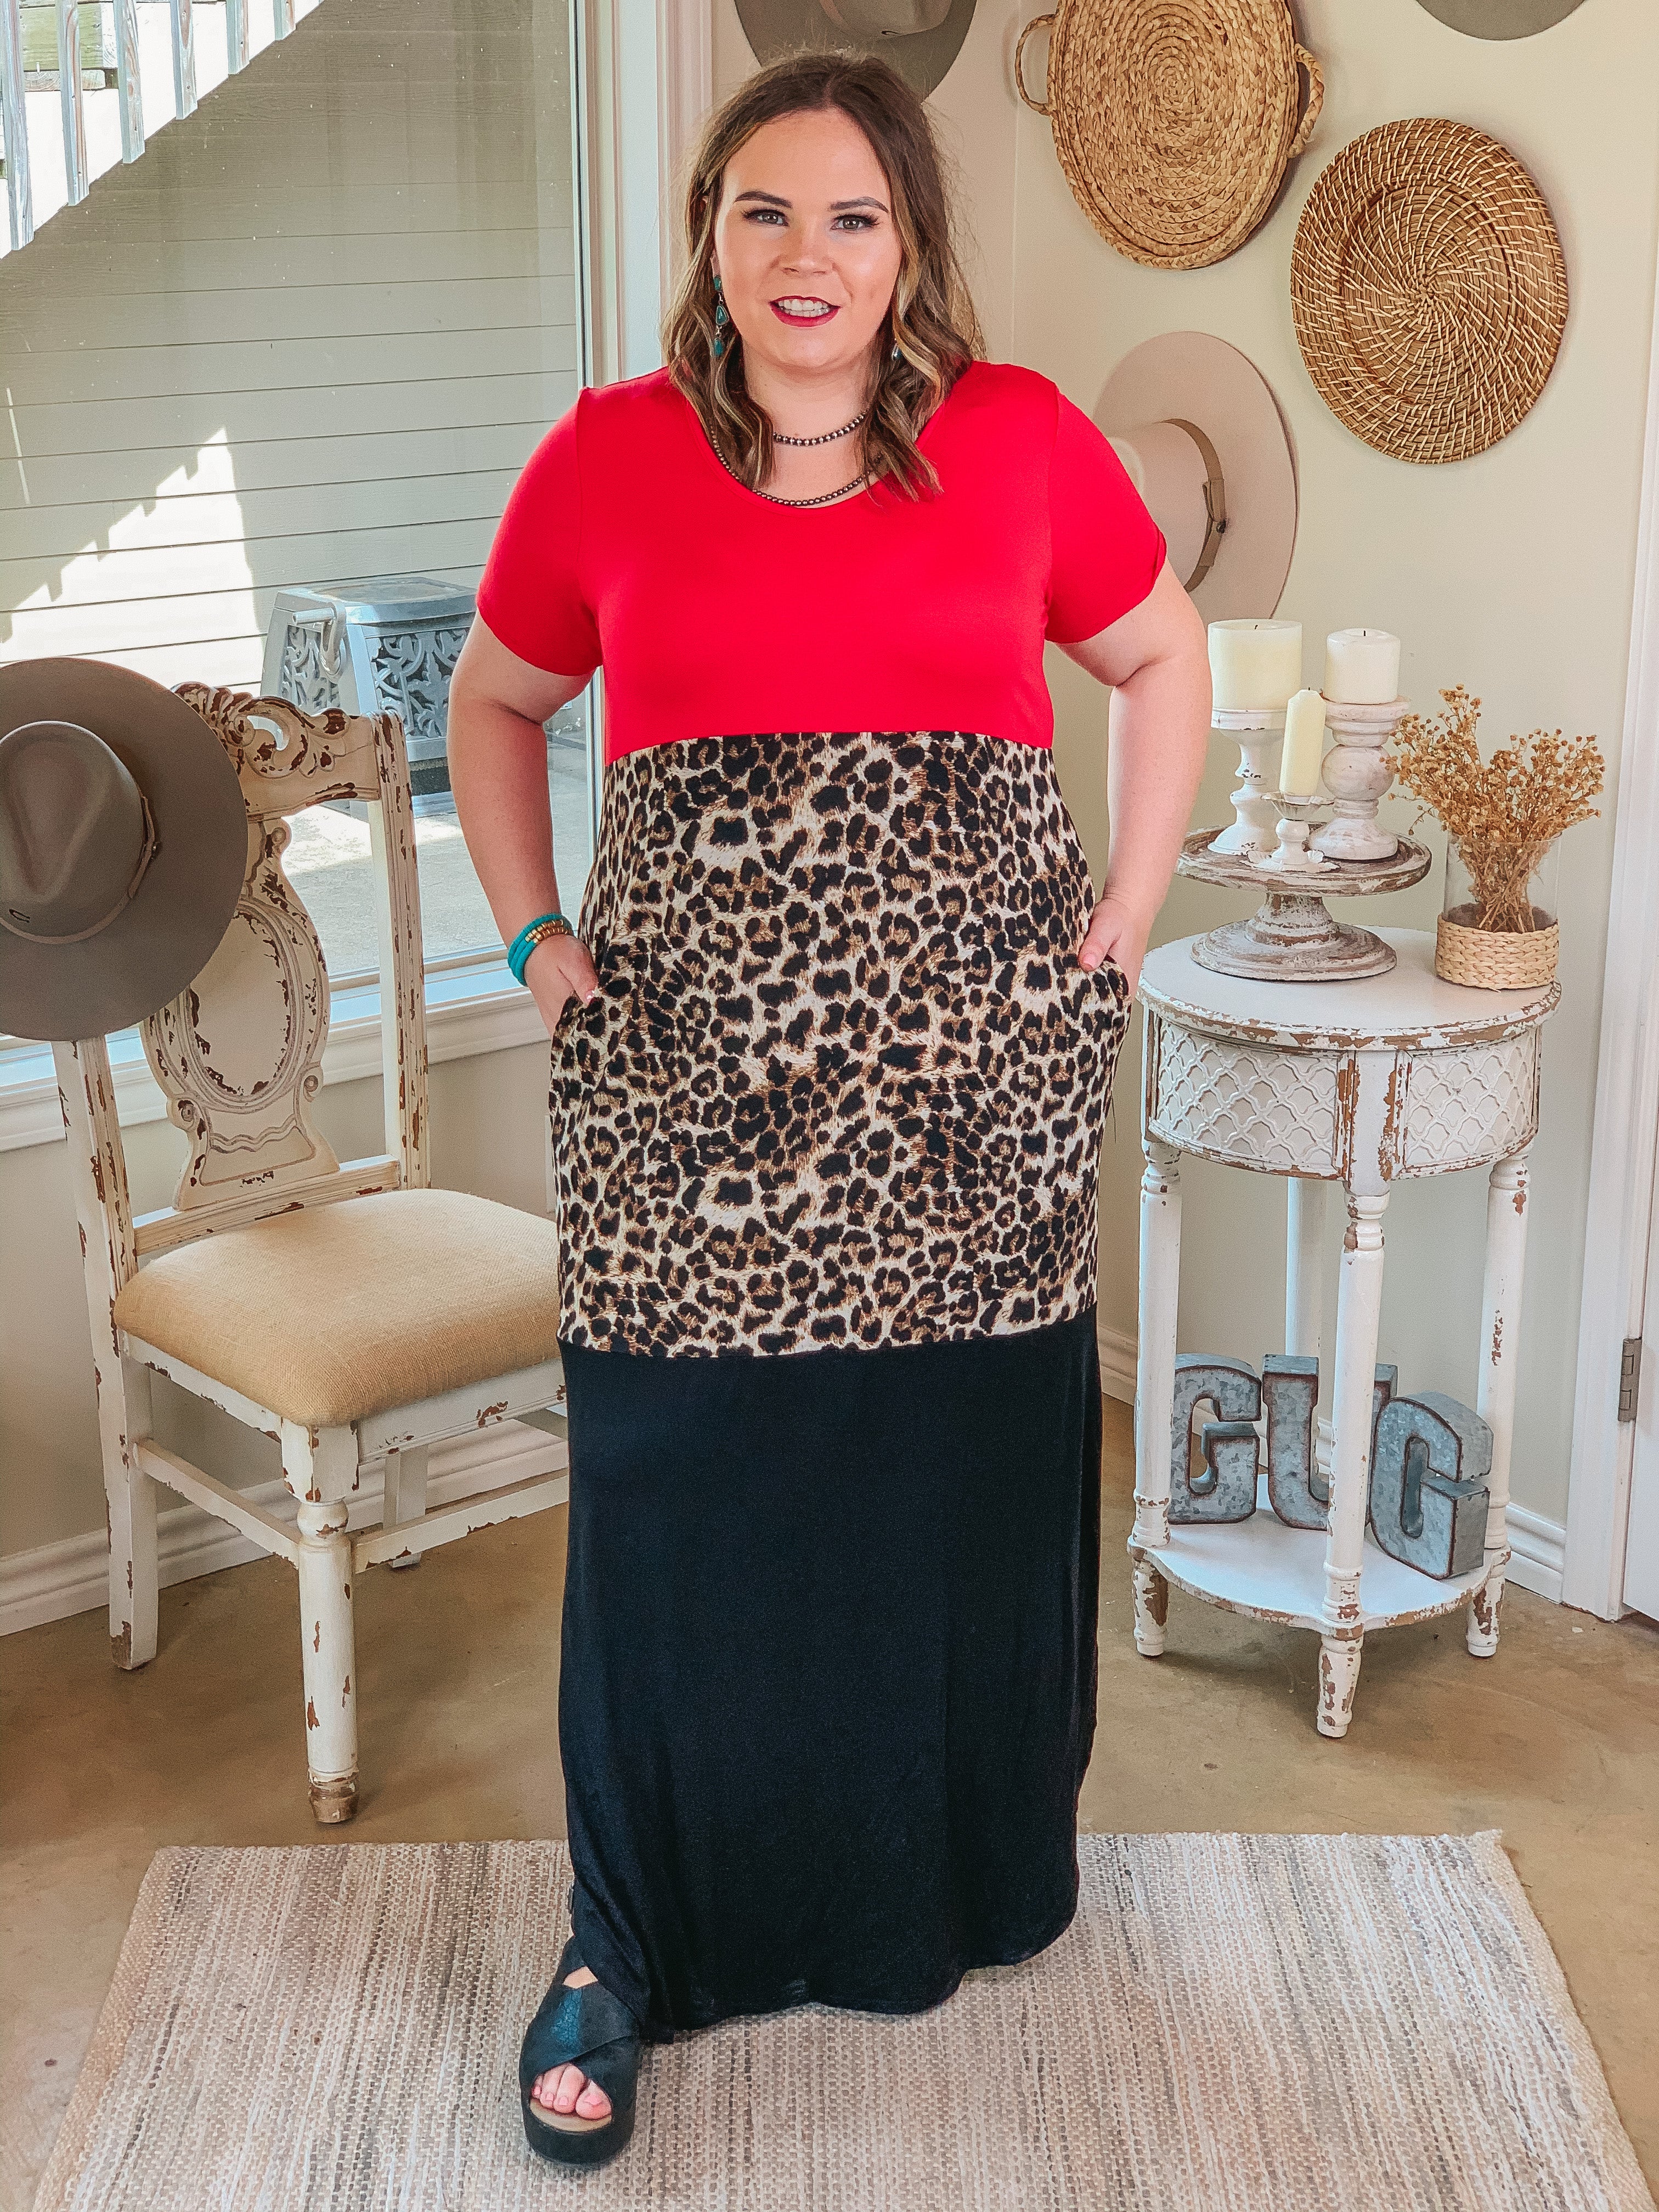 Last Chance Size Small & Medium | Change of Plans Leopard Print Color Block Maxi Dress in Red - Giddy Up Glamour Boutique